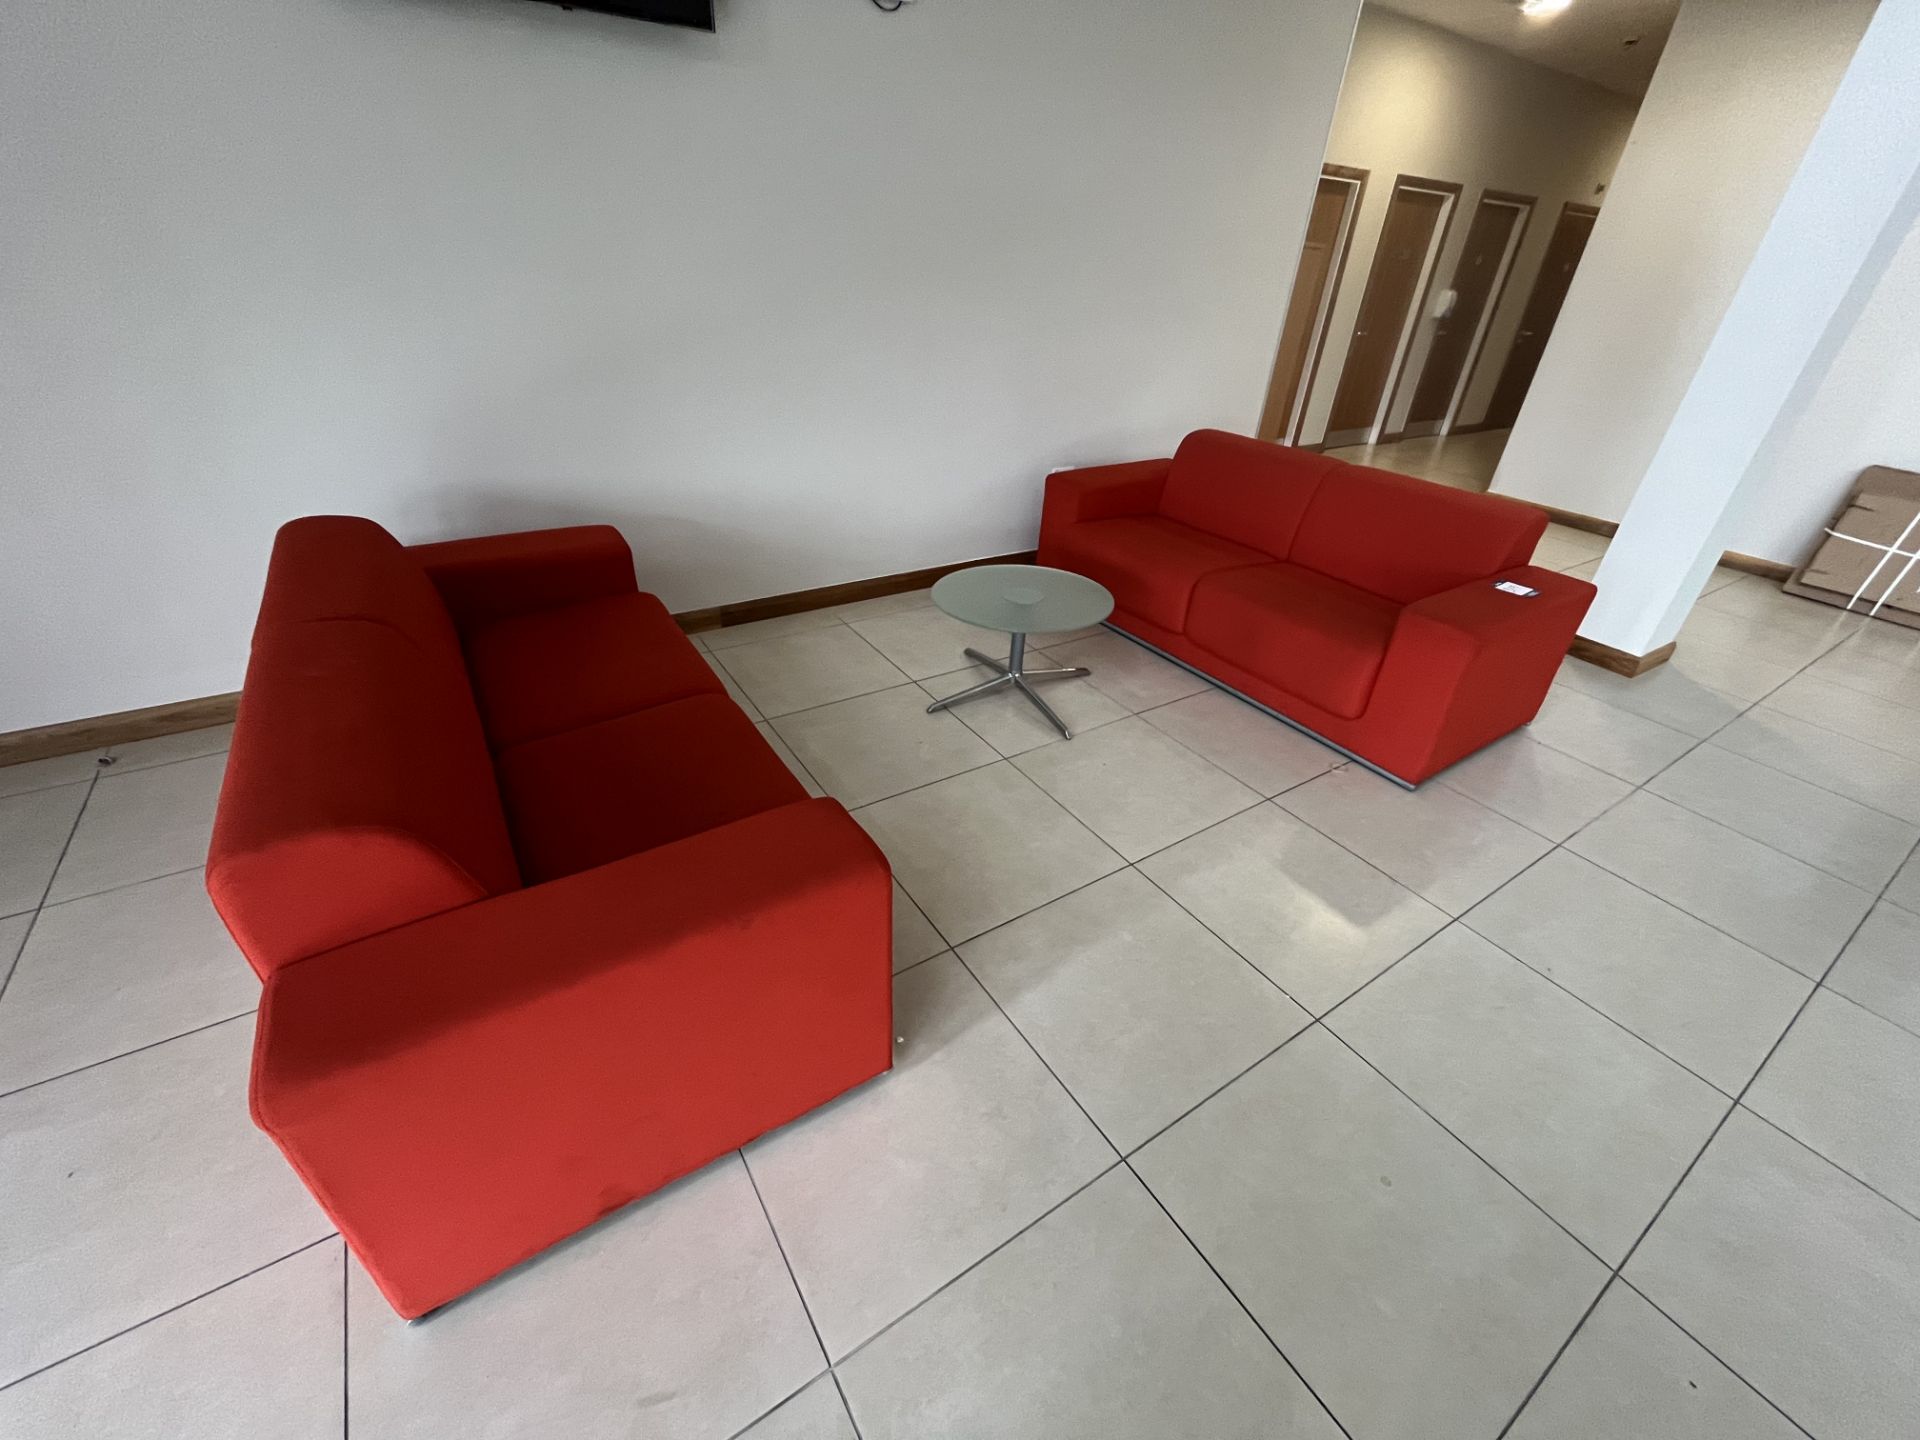 2x (no.) orange cloth upholstered two seater sofas and glass circular occasional table